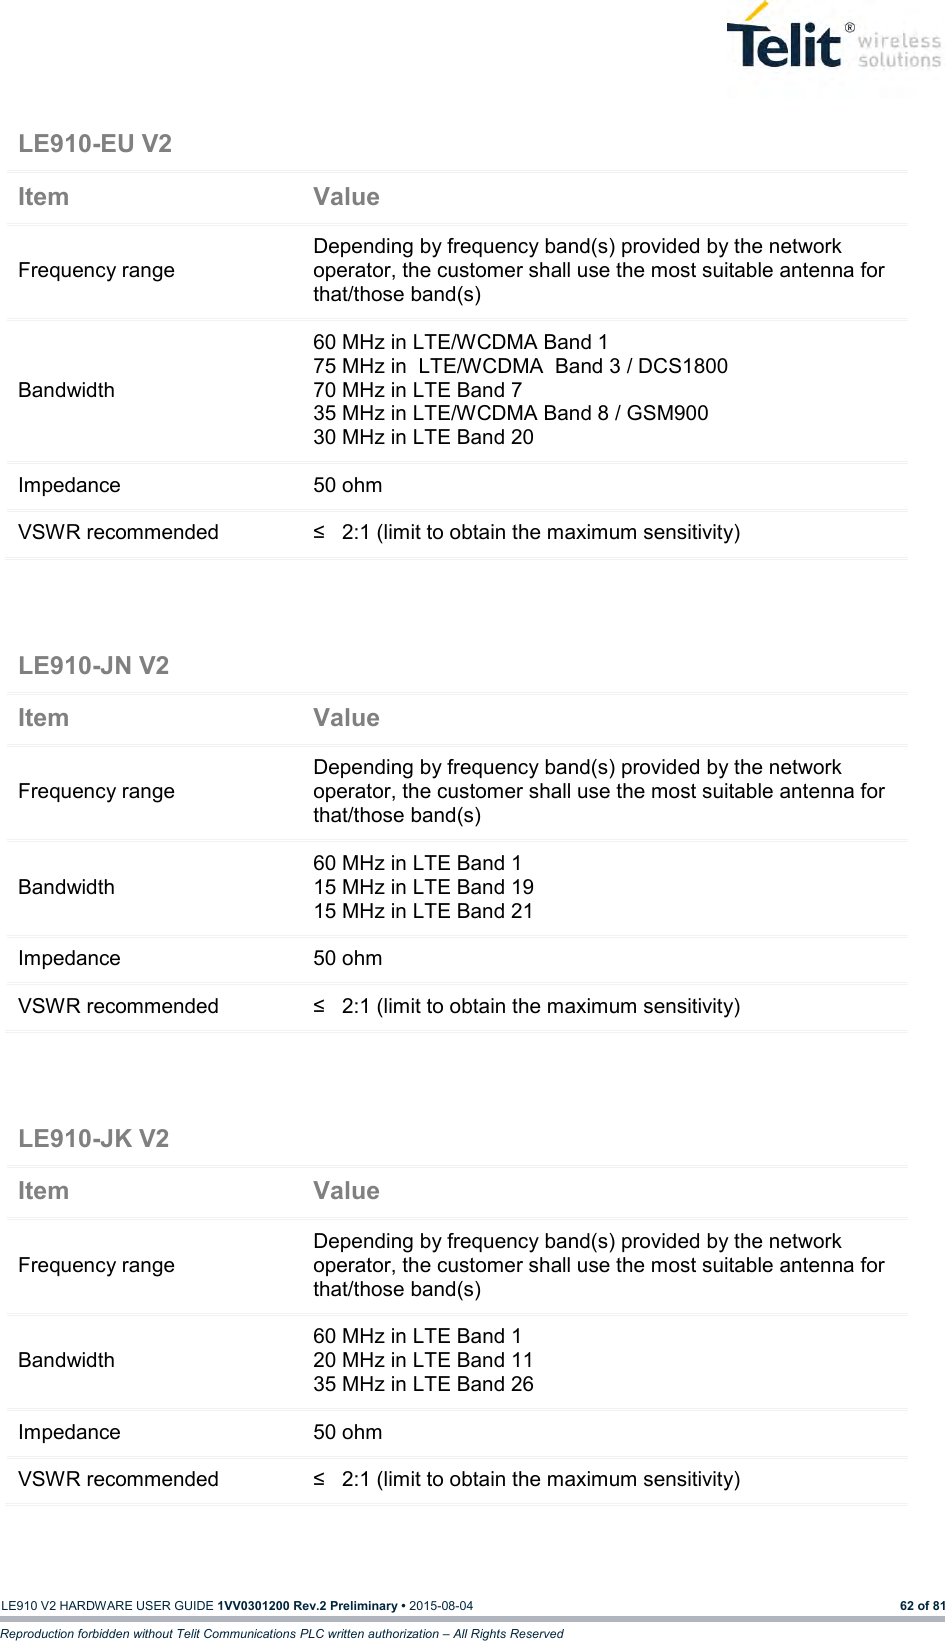   LE910 V2 HARDWARE USER GUIDE 1VV0301200 Rev.2 Preliminary • 2015-08-04 62 of 81 Reproduction forbidden without Telit Communications PLC written authorization – All Rights Reserved       LE910-EU V2  Item Value Frequency range Depending by frequency band(s) provided by the network operator, the customer shall use the most suitable antenna for that/those band(s) Bandwidth 60 MHz in LTE/WCDMA Band 1 75 MHz in  LTE/WCDMA  Band 3 / DCS1800 70 MHz in LTE Band 7 35 MHz in LTE/WCDMA Band 8 / GSM900 30 MHz in LTE Band 20 Impedance 50 ohm VSWR recommended ≤   2:1 (limit to obtain the maximum sensitivity) LE910-JN V2  Item Value Frequency range Depending by frequency band(s) provided by the network operator, the customer shall use the most suitable antenna for that/those band(s) Bandwidth 60 MHz in LTE Band 1 15 MHz in LTE Band 19 15 MHz in LTE Band 21 Impedance 50 ohm VSWR recommended ≤   2:1 (limit to obtain the maximum sensitivity) LE910-JK V2  Item Value Frequency range Depending by frequency band(s) provided by the network operator, the customer shall use the most suitable antenna for that/those band(s) Bandwidth 60 MHz in LTE Band 1 20 MHz in LTE Band 11 35 MHz in LTE Band 26 Impedance 50 ohm VSWR recommended ≤   2:1 (limit to obtain the maximum sensitivity) 